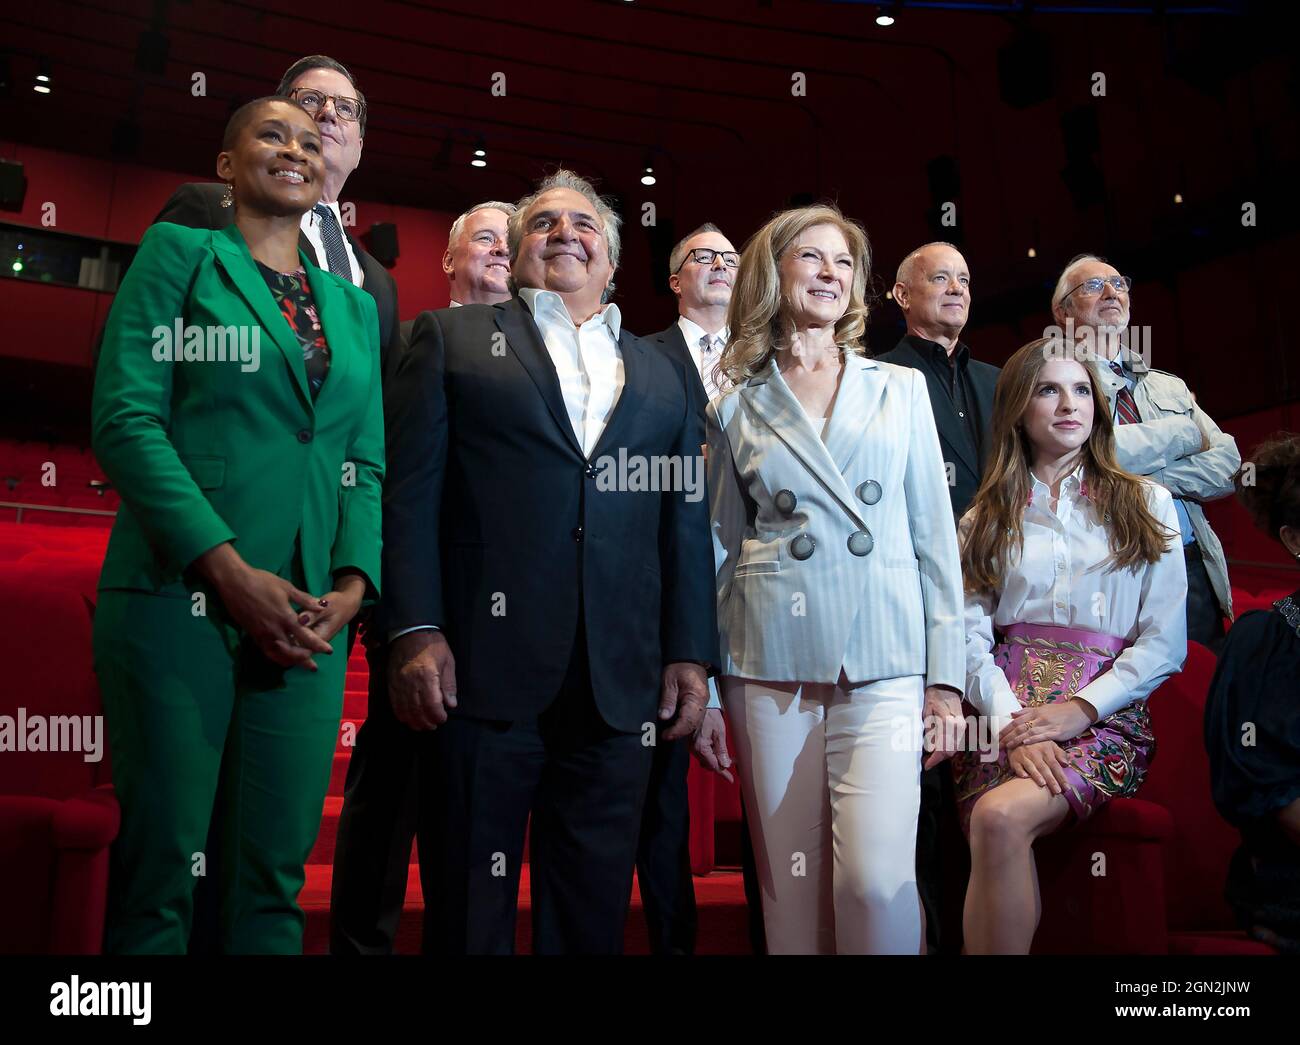 Group shot at the press opening for the Academy Museum of Motion Pictures, Los Angeles, California Stock Photo